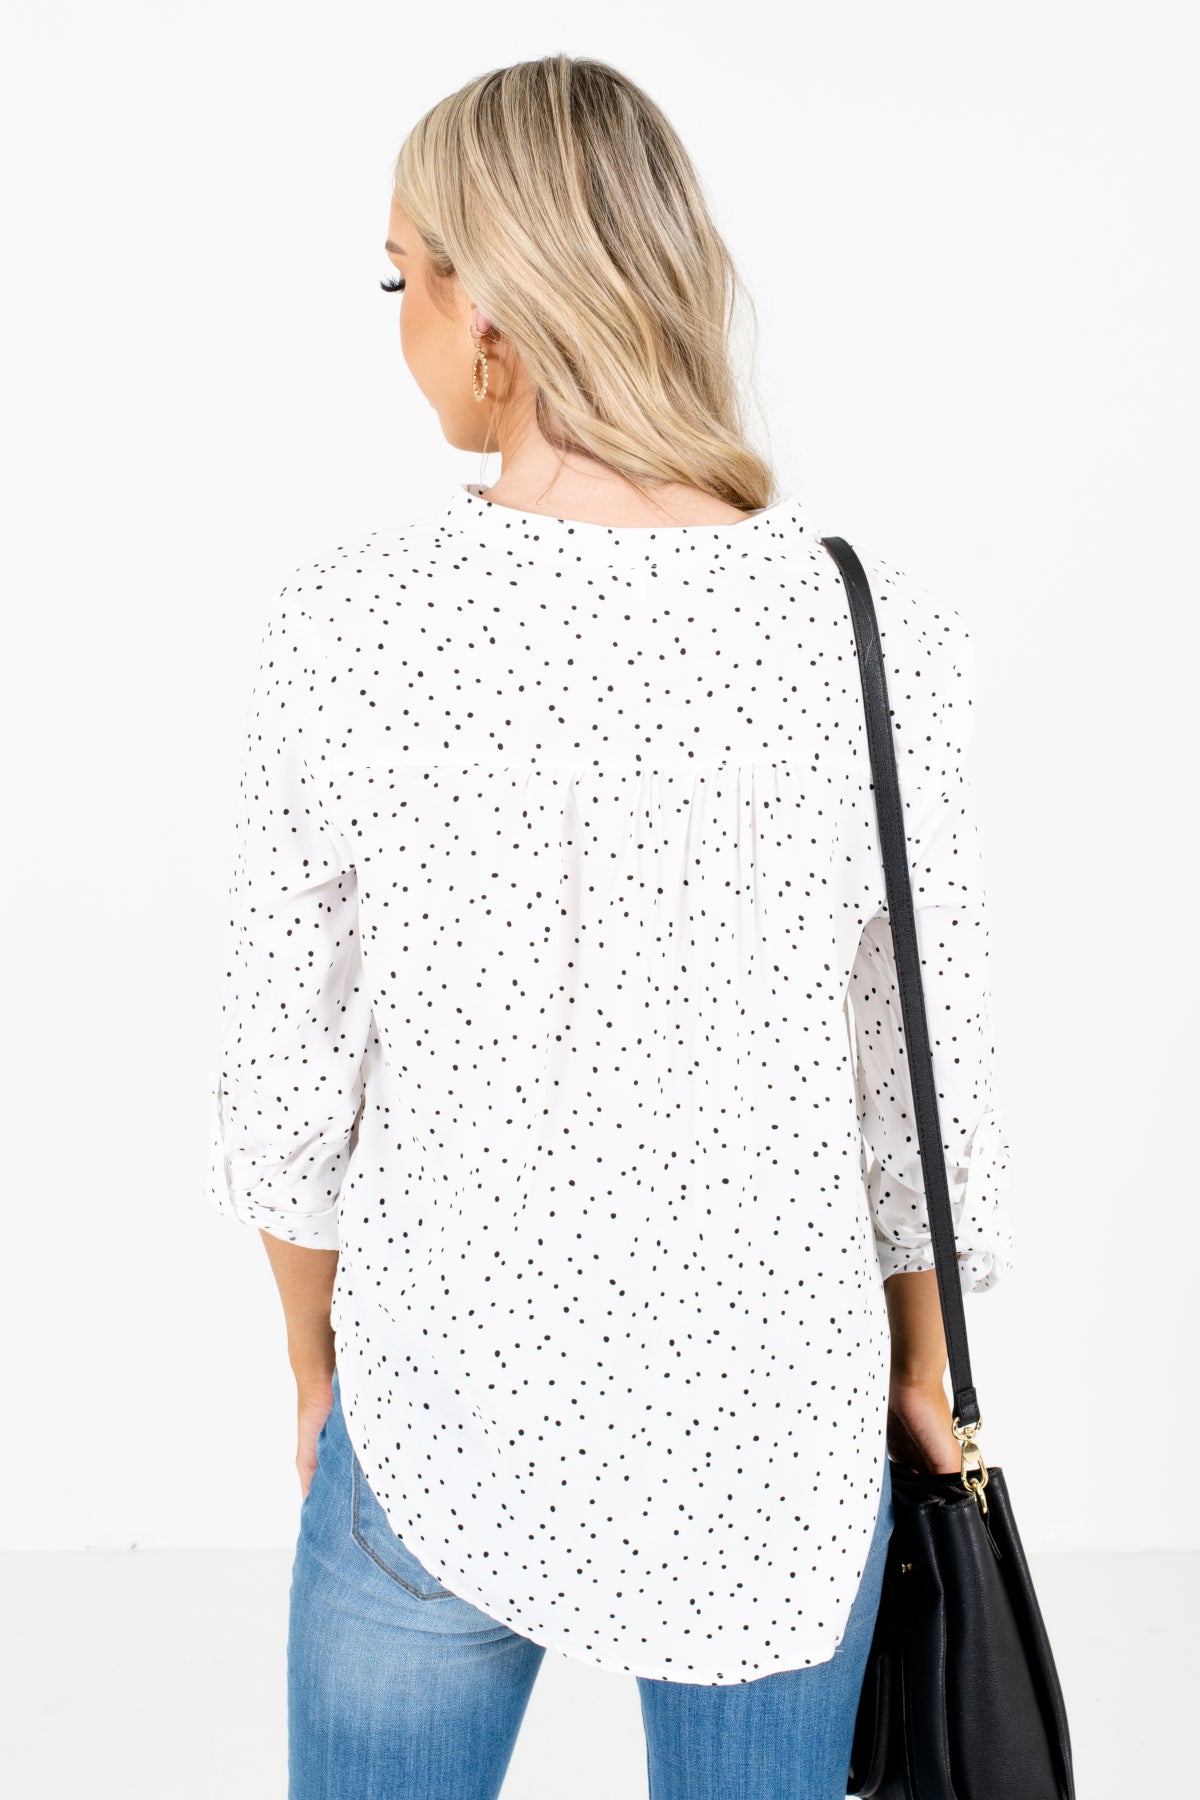 White 3/4 Length Sleeve Boutique Tops for Women